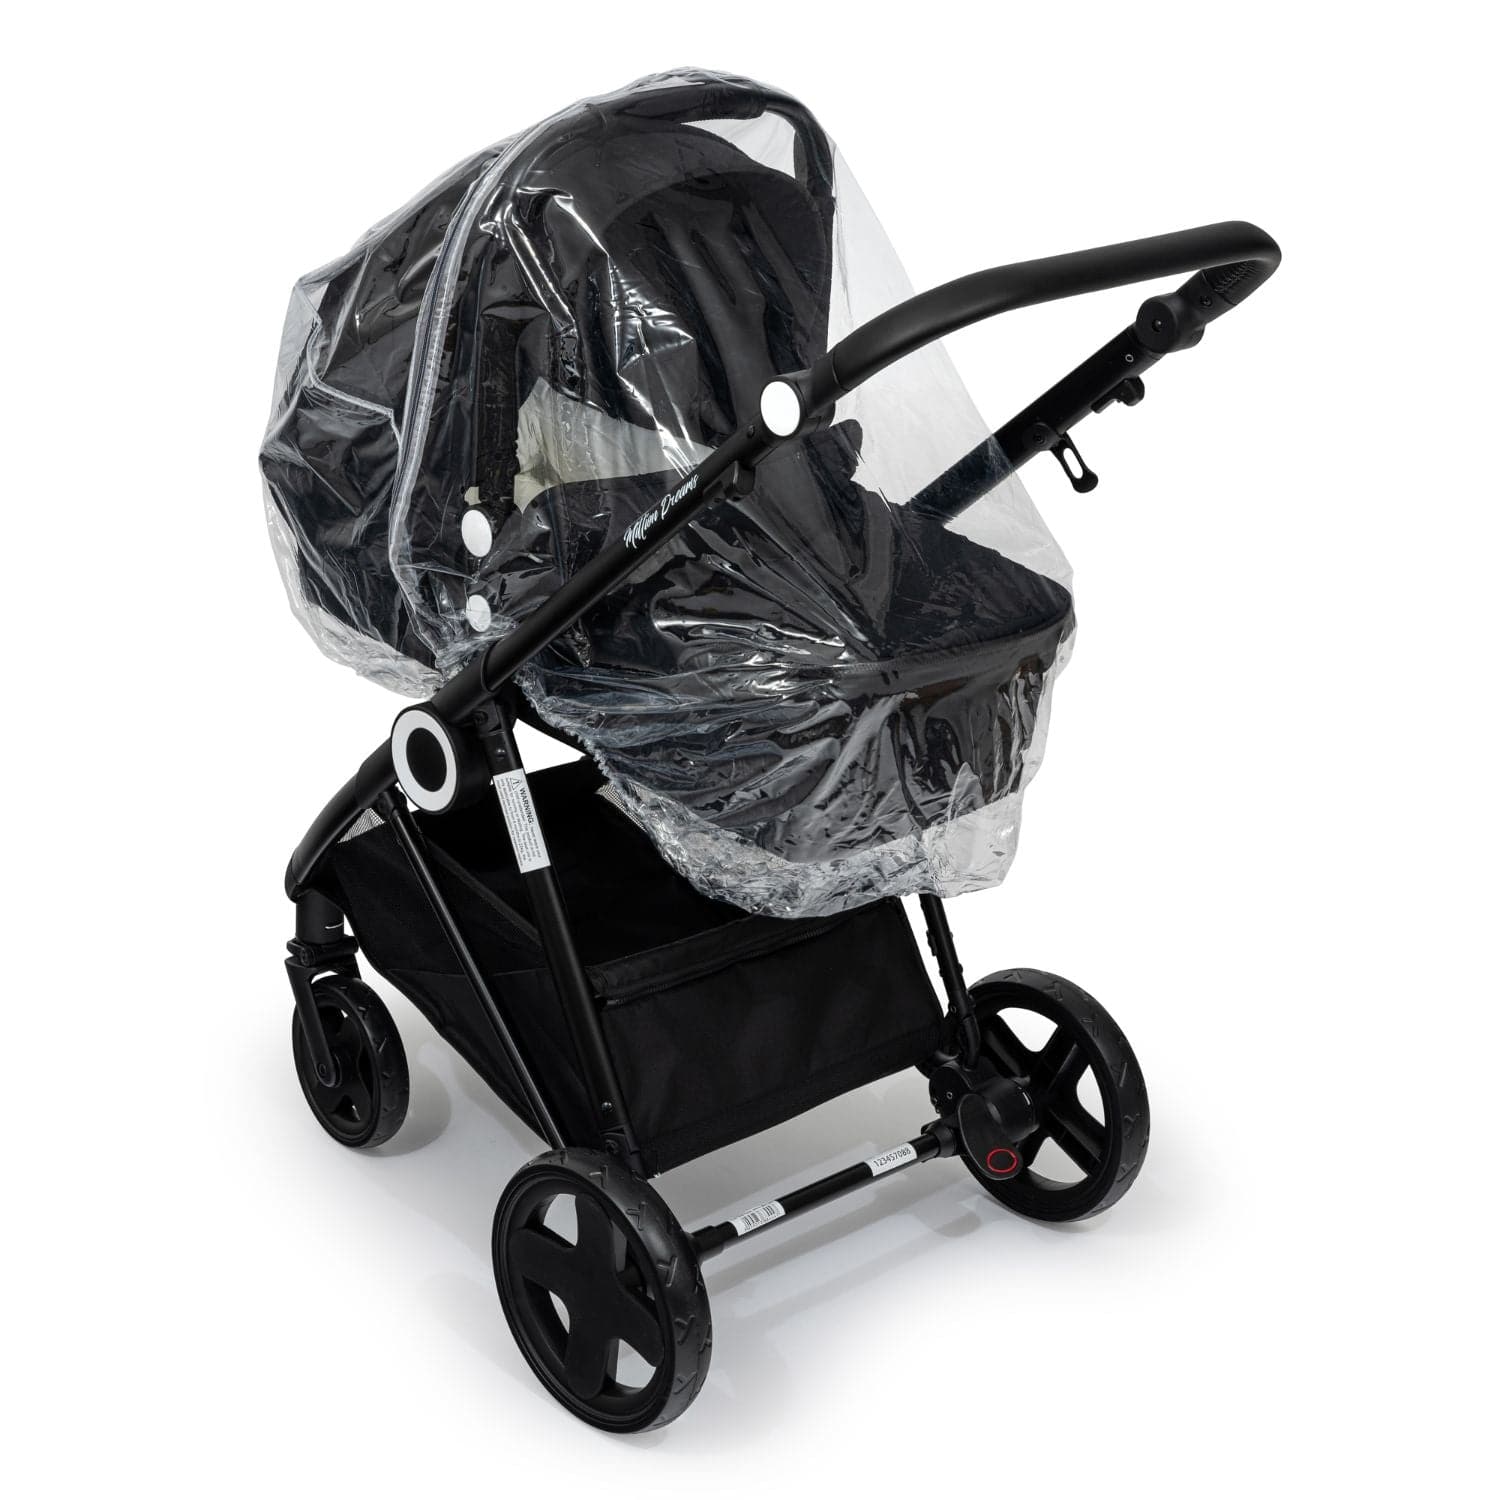 Carrycot Raincover Compatible With Hesba - Fits All Models - For Your Little One